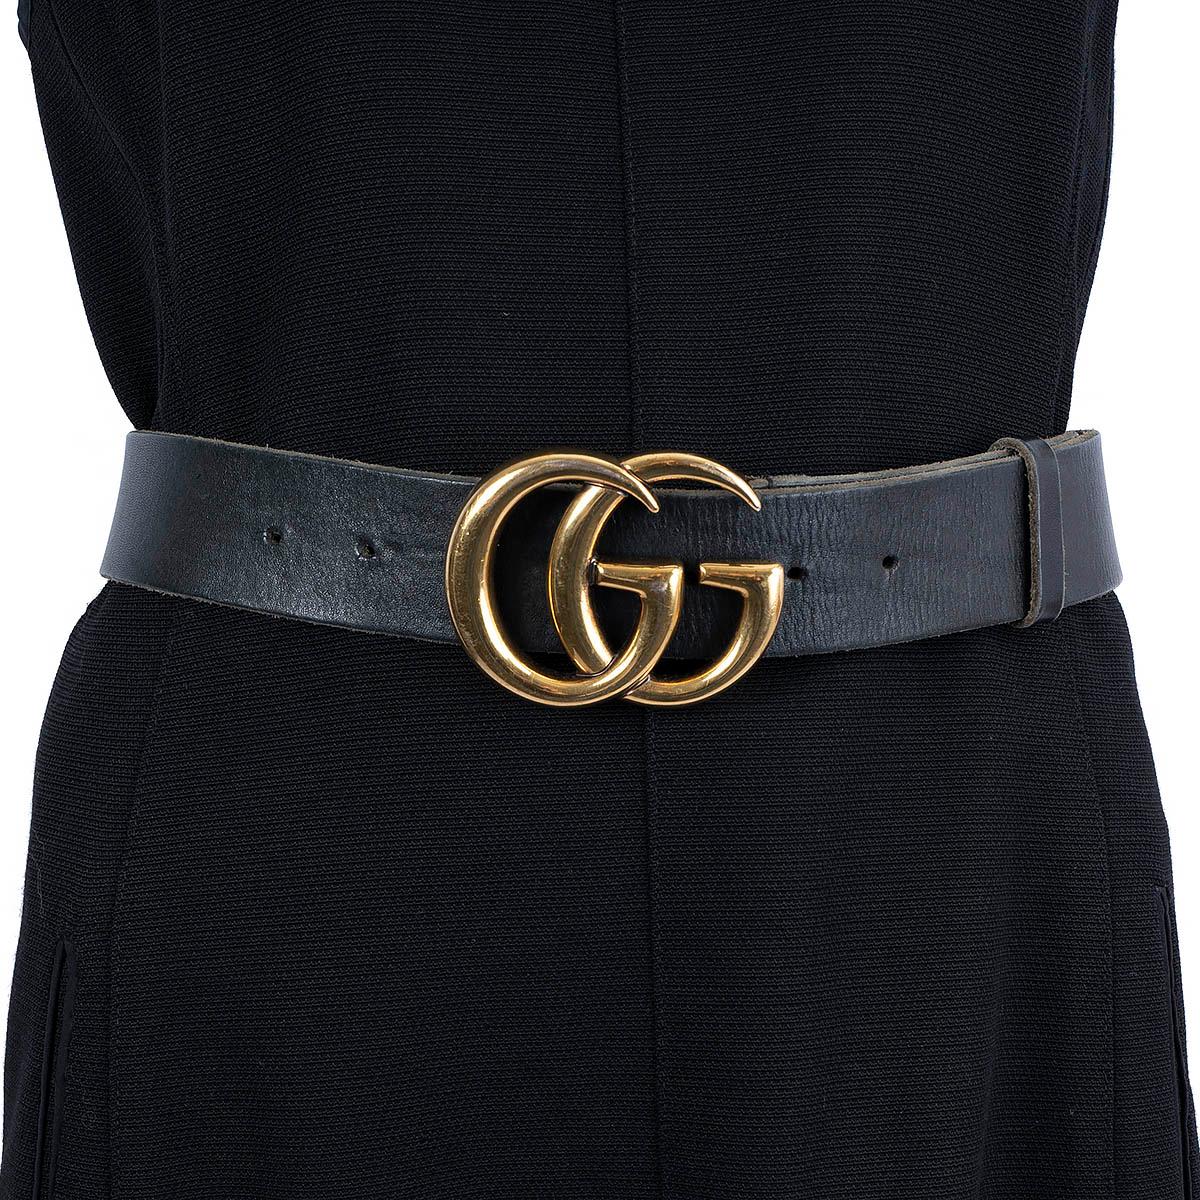 100% authentic Gucci GG buckle belt in black leather featuring gold-tone hardware. Has been worn with overall signs of use - generally in very good condition.

Measurements
Tag Size	75
Size	75cm (29.3in)
Width	3.5cm (1.4in)
Fits	65cm (25.4in) to